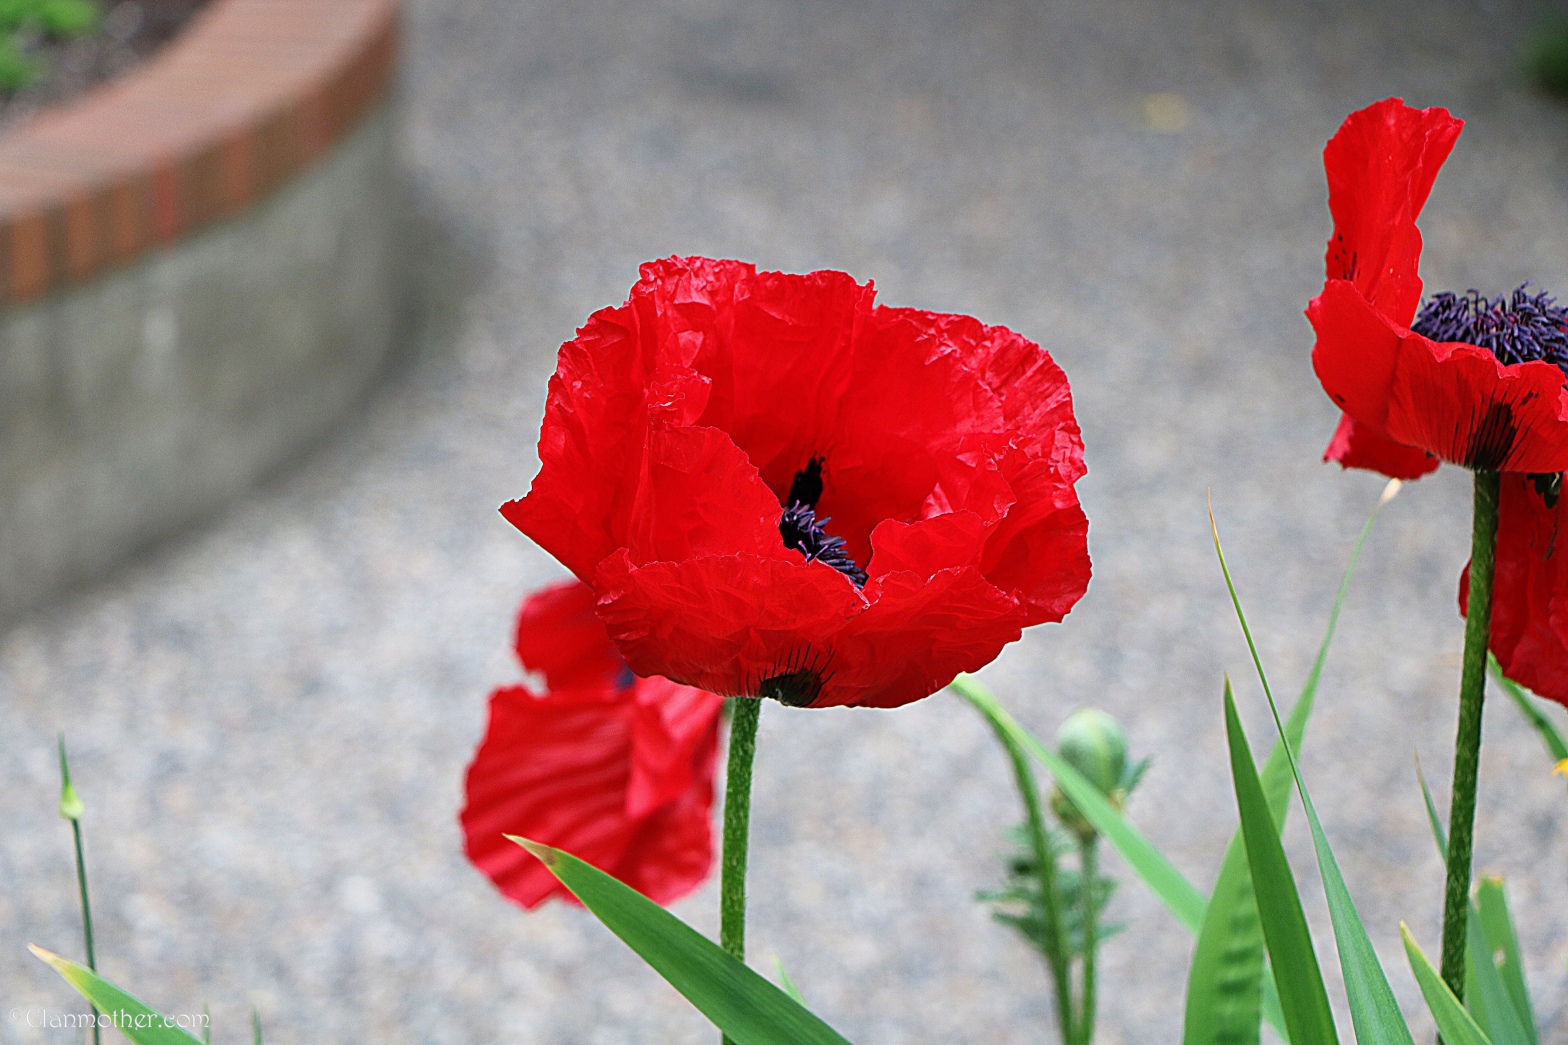 A Poppy of Remembrance